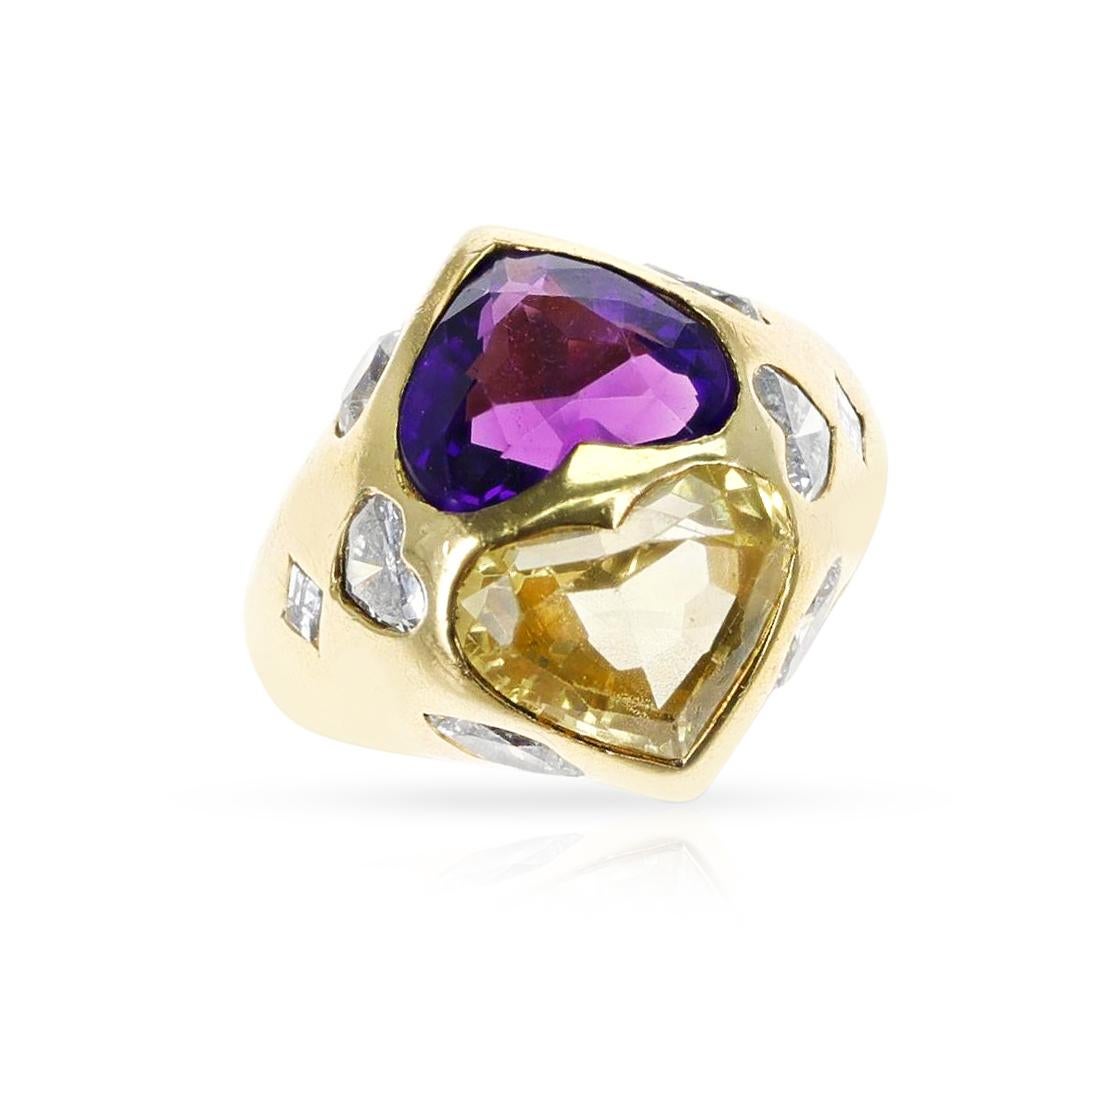 A GIA Certified Heart Shape Natural Yellow Sapphire and Amethyst Twin Ring with Diamonds. The yellow sapphire is unheated as stated by GIA and weighs appx. 4.75 carats. The ring is made in 18k Yellow Gold. The total weight of the ring is 18.40